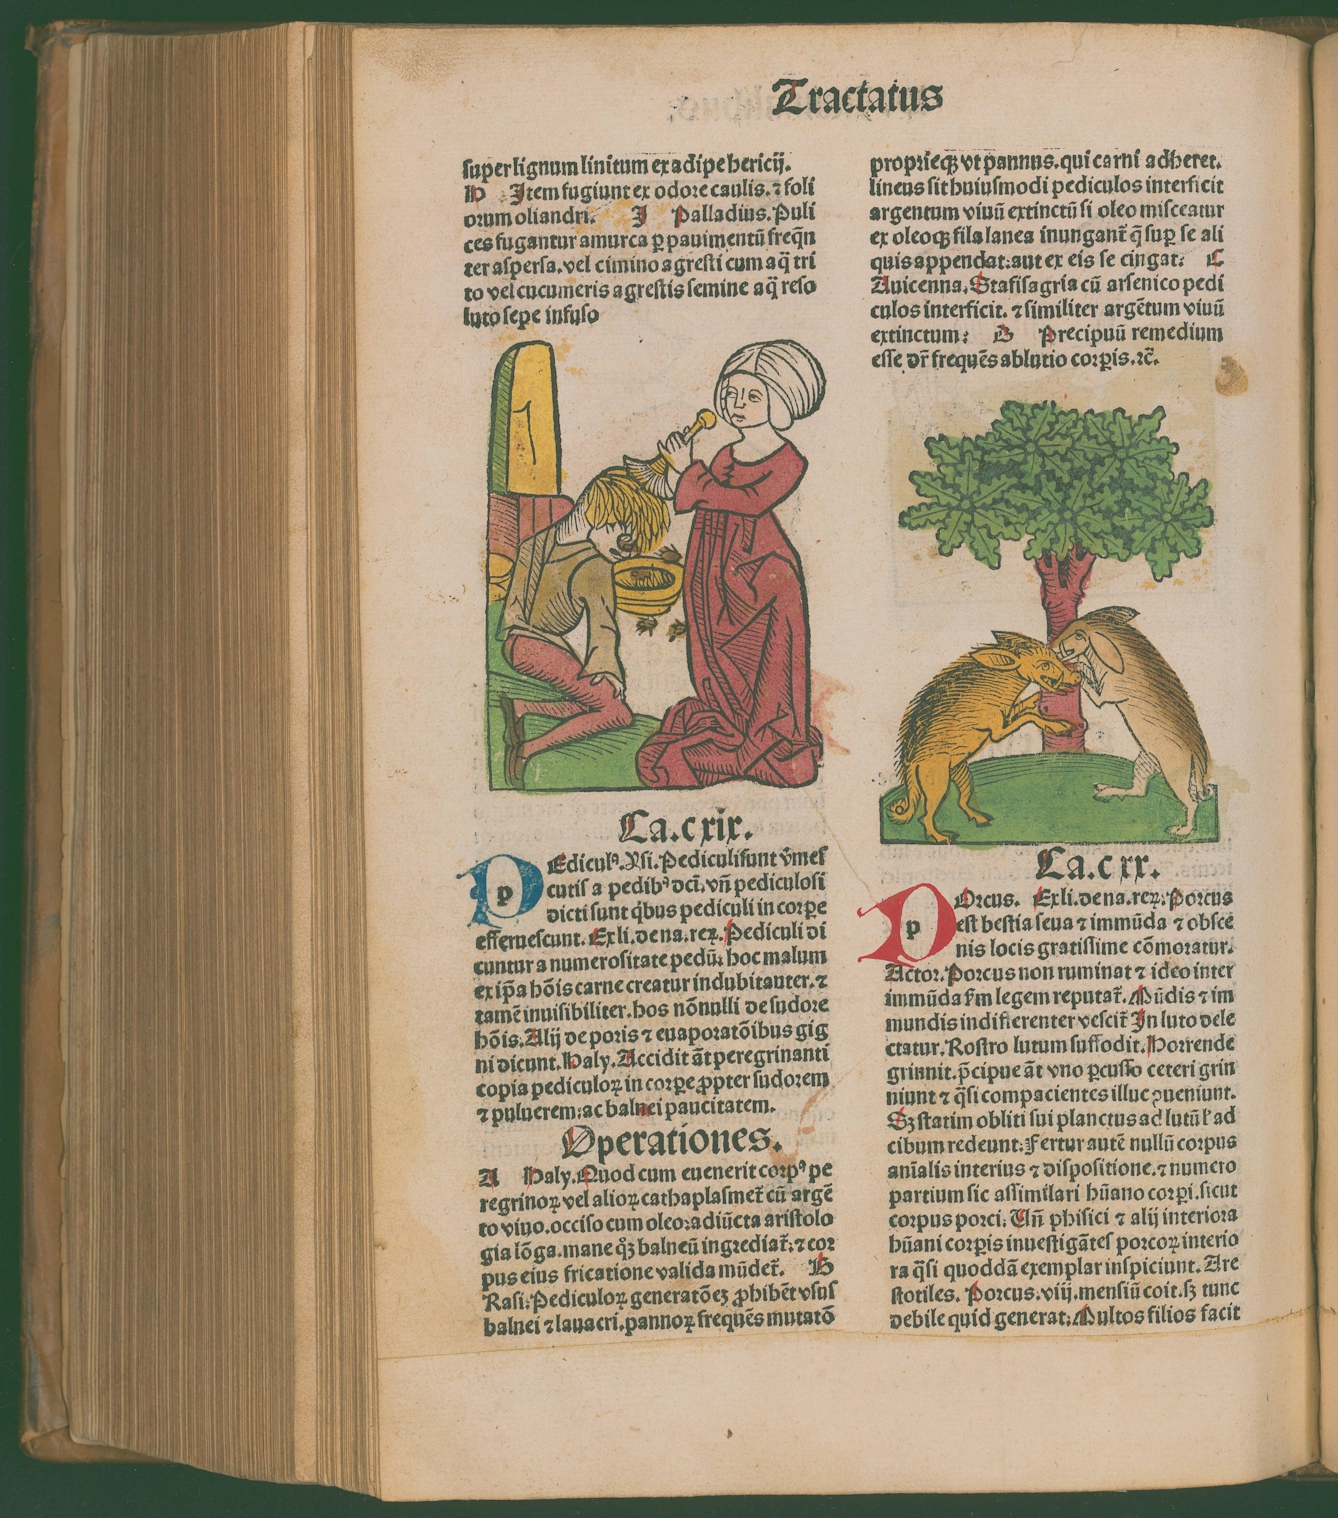 A page with latin text and two illustrations: one of a woman washing a man's hair, and one of two large rodents fighting in front of a tree.